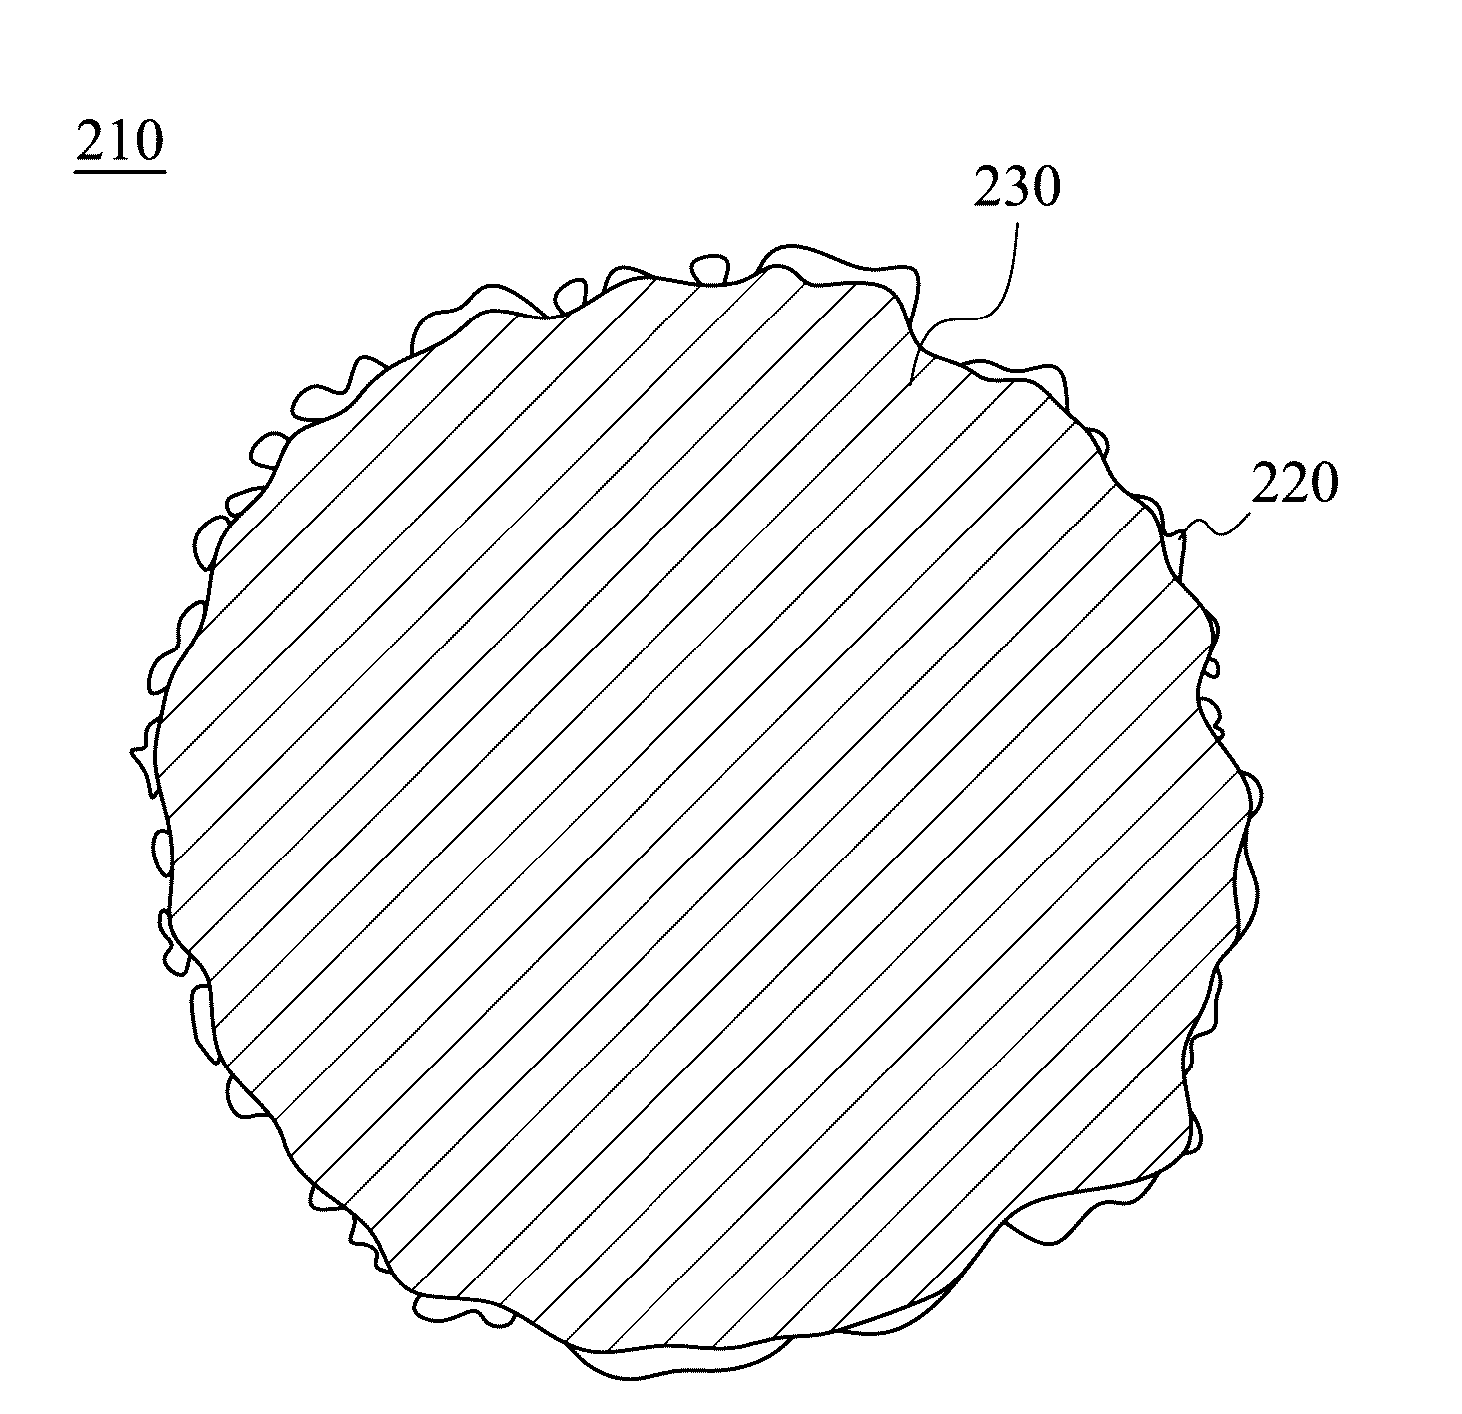 Catalyst structure for electrolysis of water and method of forming the same